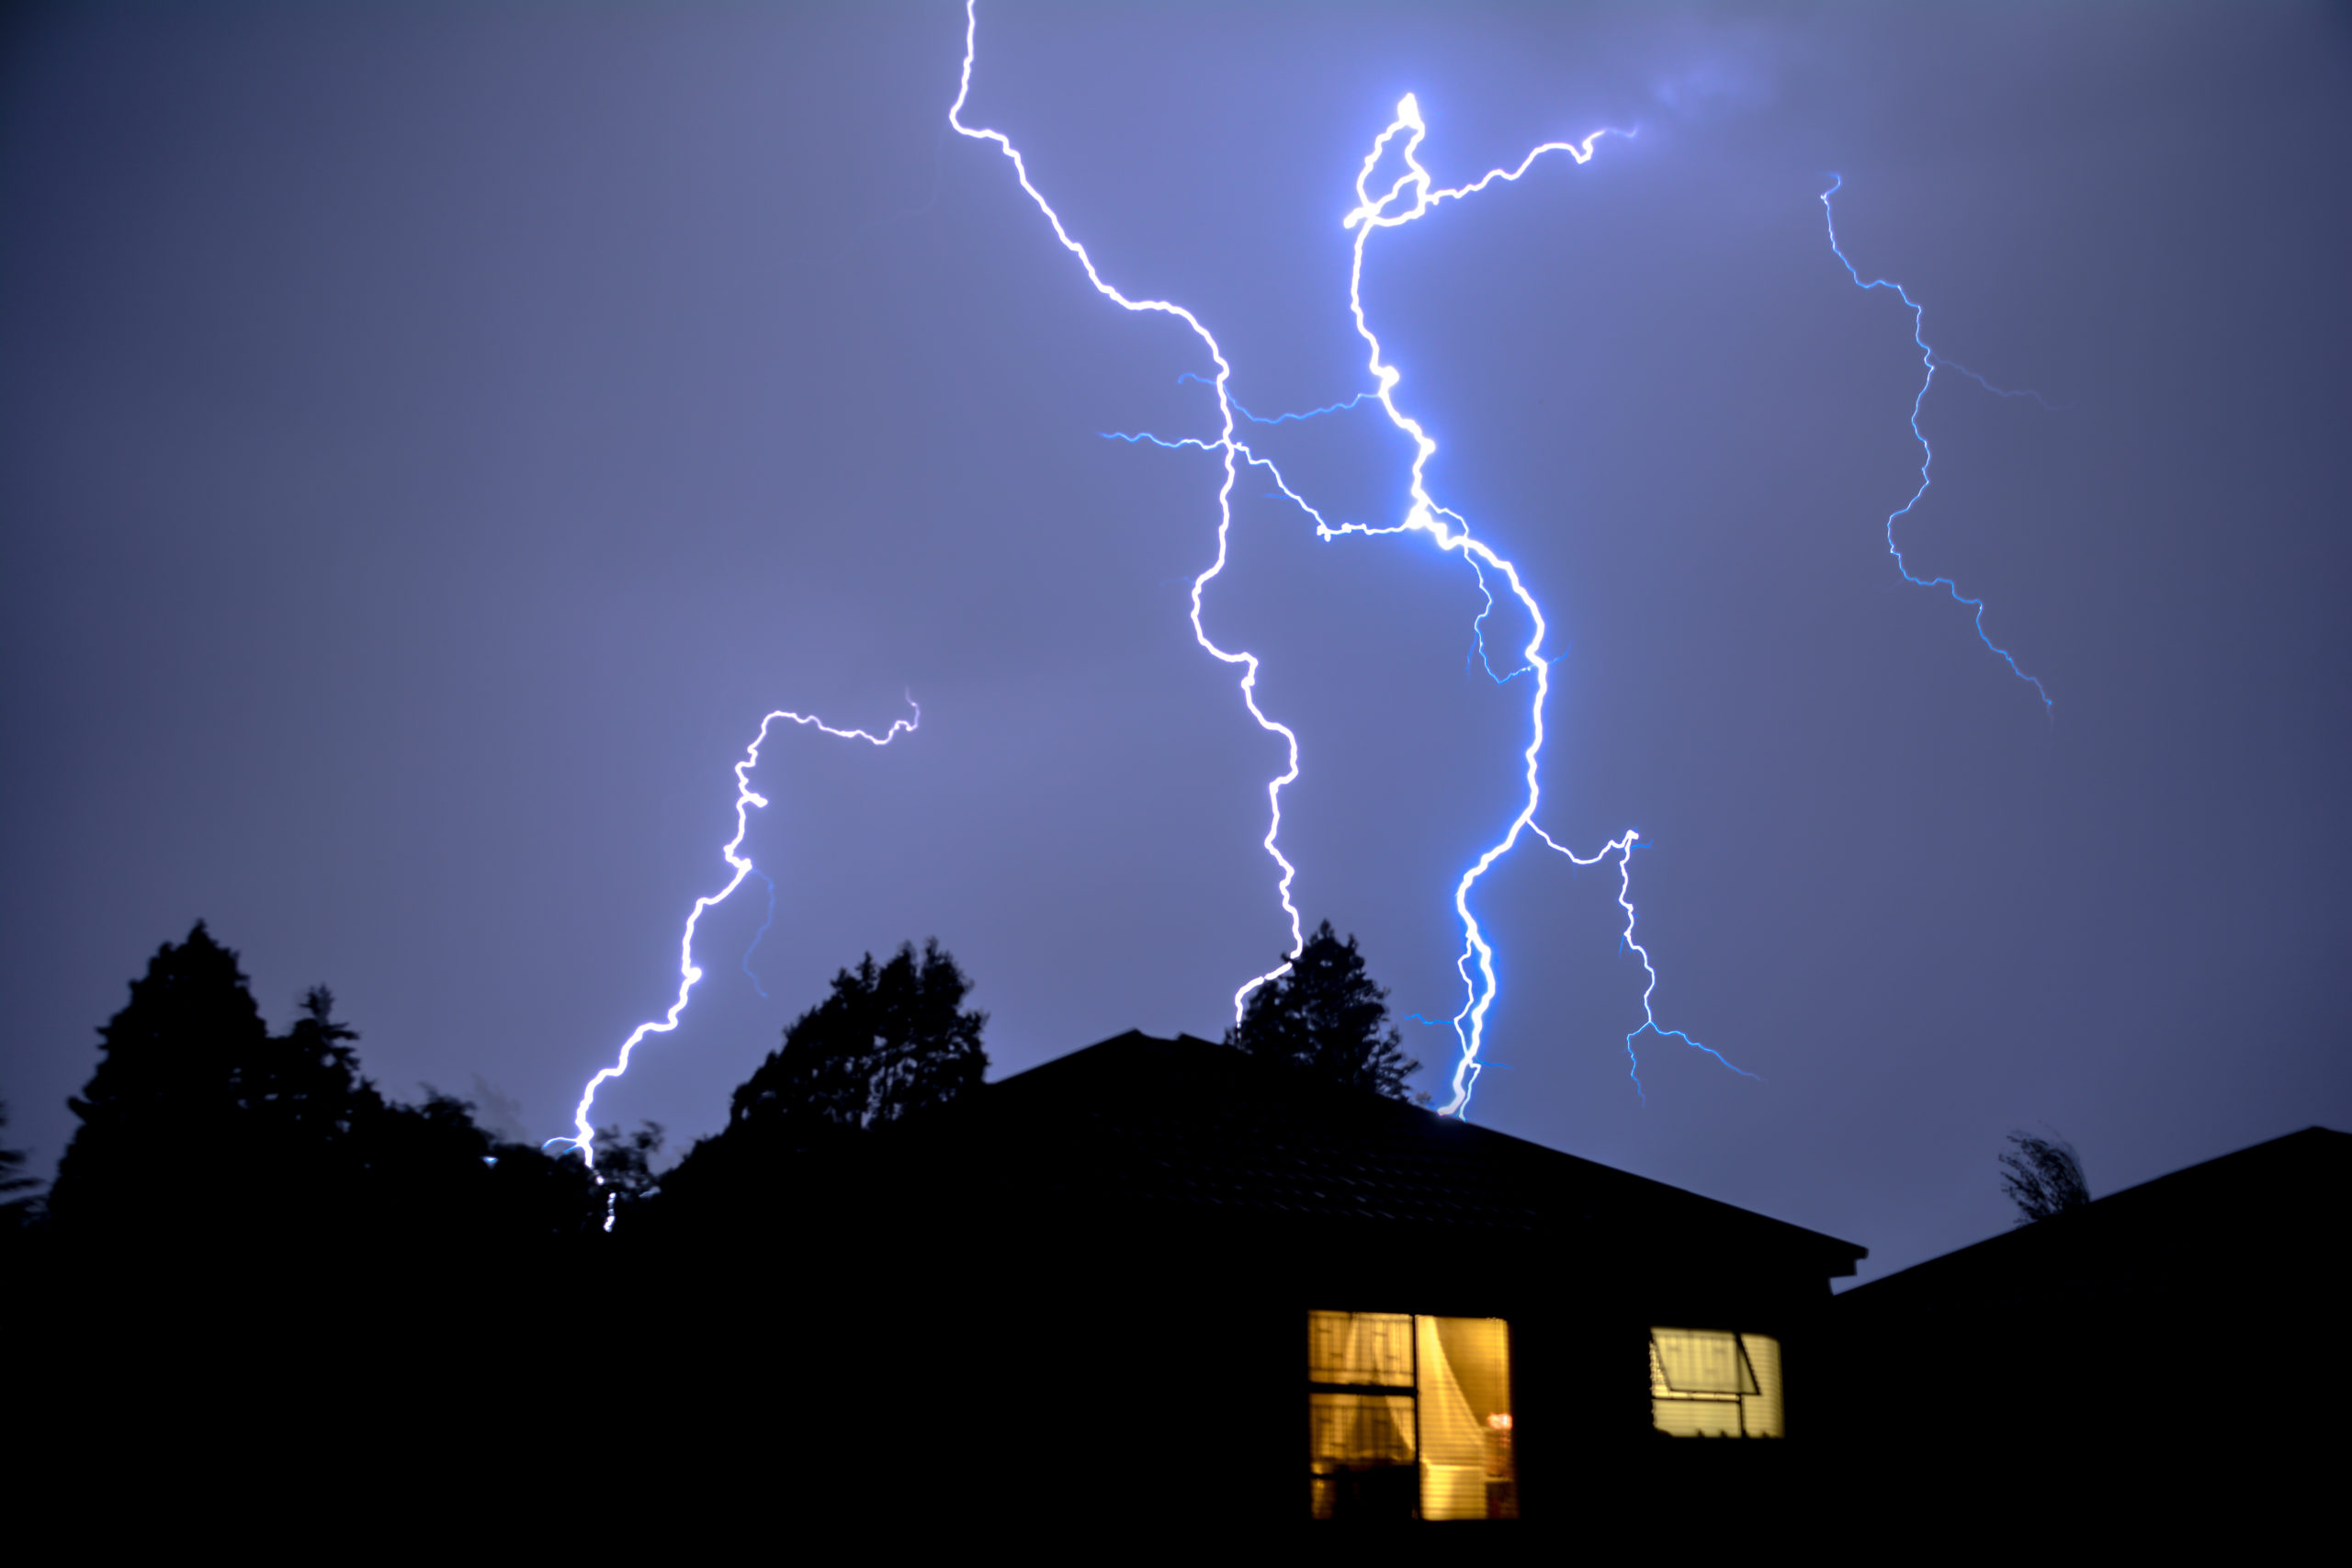 A lightning strike lights up the sky behind a residential home during a storm